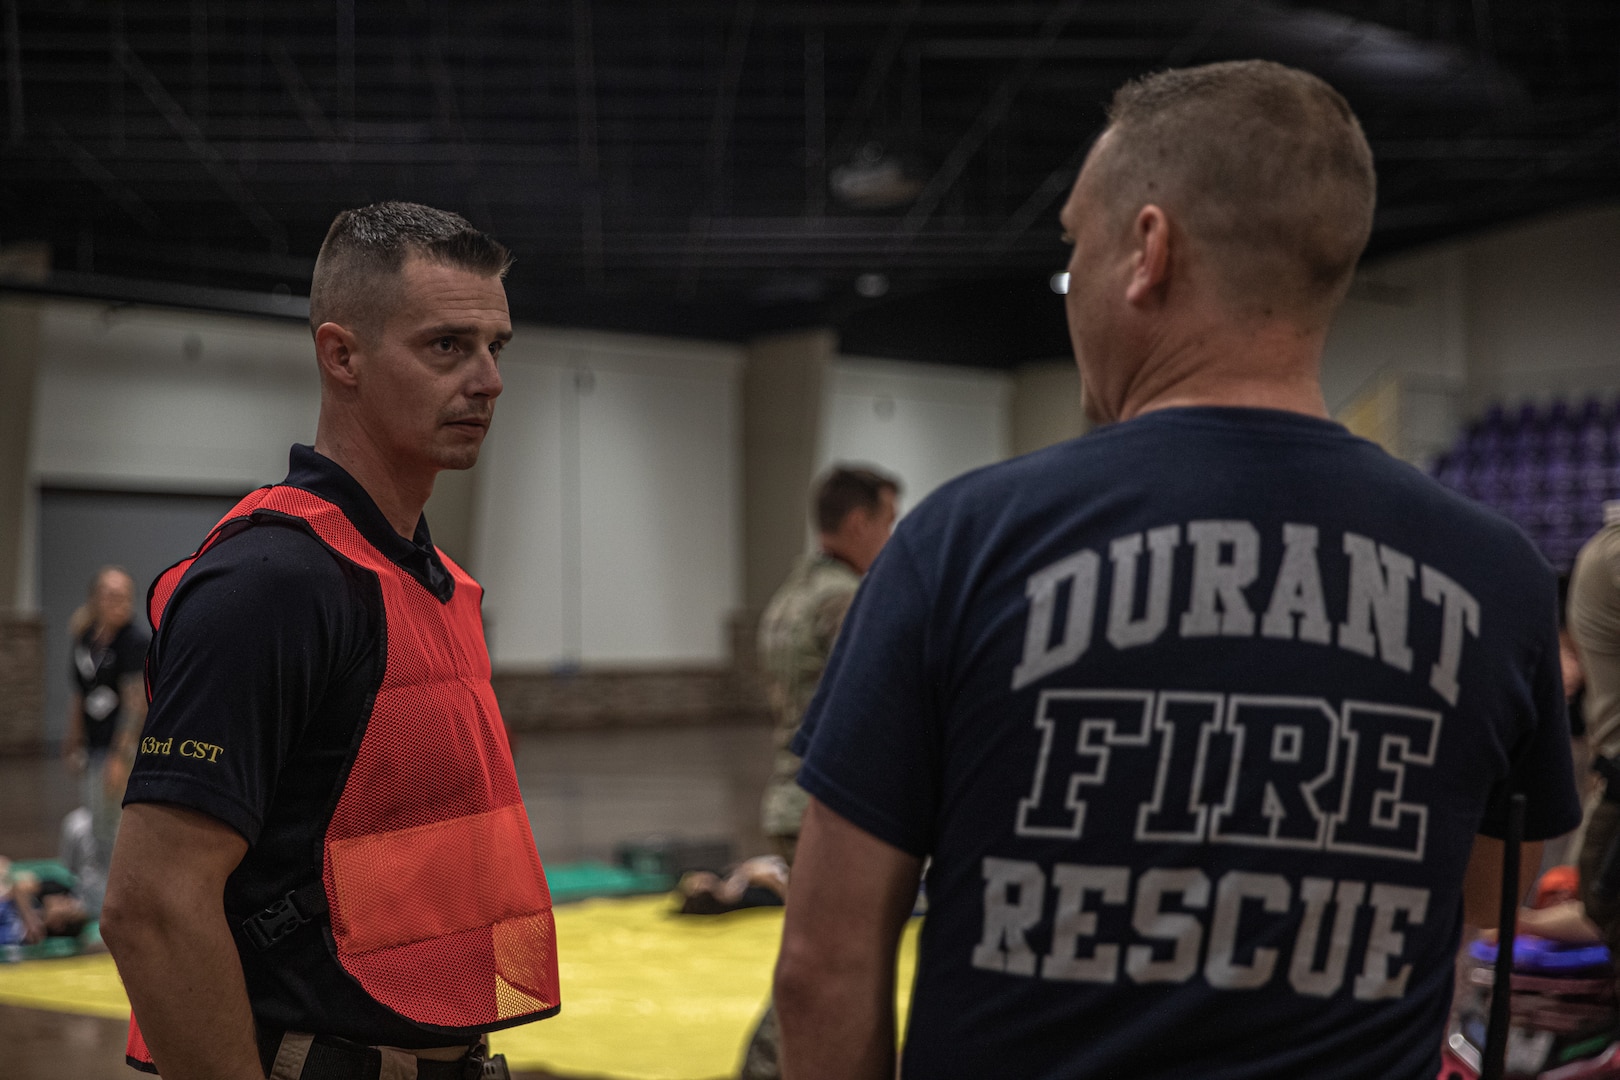 Sgt. 1st Class Ron Poland (left), medical non-commissioned officer, 63rd Civil Support Team, 90th Troop Command, Oklahoma Army National Guard, speaks with a member of the Durant Fire Department during a Regional Emergency Medical Services System training event at the Choctaw Event Center in Durant, Oklahoma, September 21, 2022. (Oklahoma National Guard Photo by Sgt. Reece Heck)